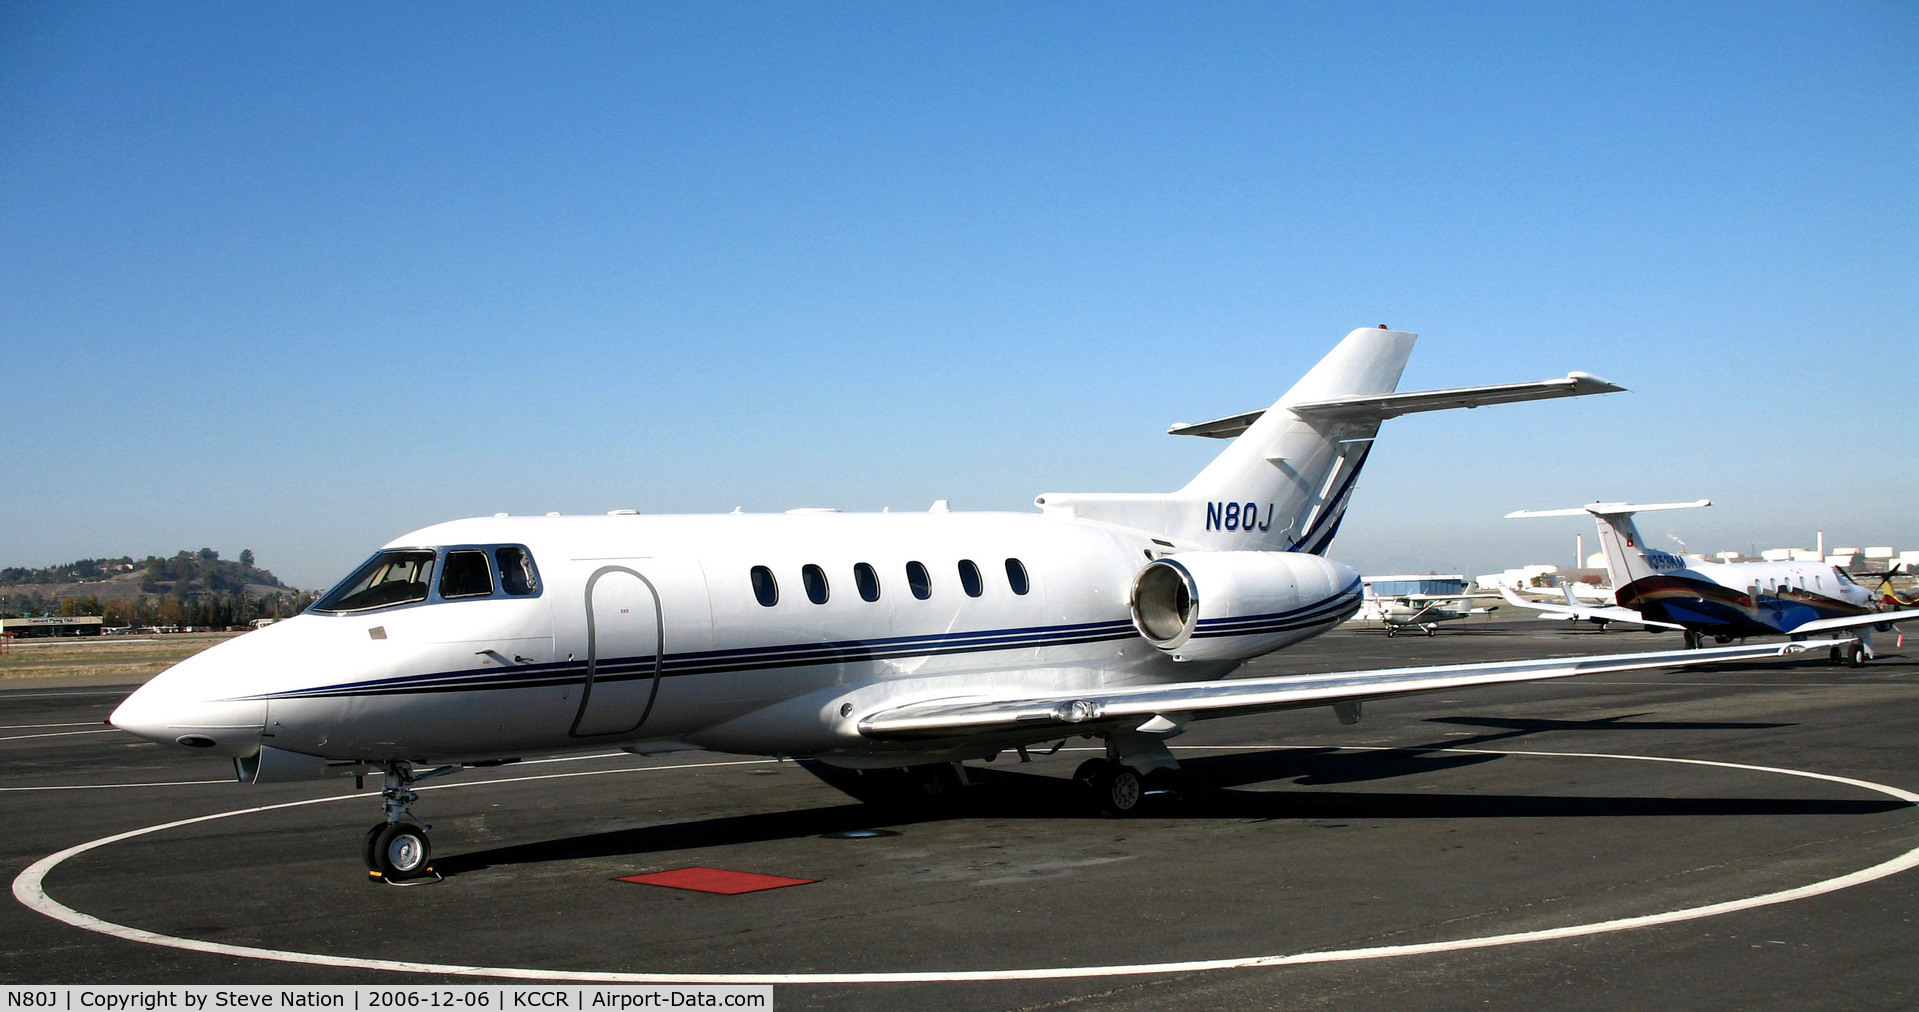 N80J, 2004 Raytheon 800XP Hawker C/N 258681, U. S. Steel Corp., Pittsburgh, PA 2004 Raytheon Aircraft Hawker 800XP @ Buchanan Field, Concord, CA (Re-registered N80JE to new owner in Salem, OR 2010-02-05 and N119BG to RER Investments LLC, Houston, TX 2015-07-07)